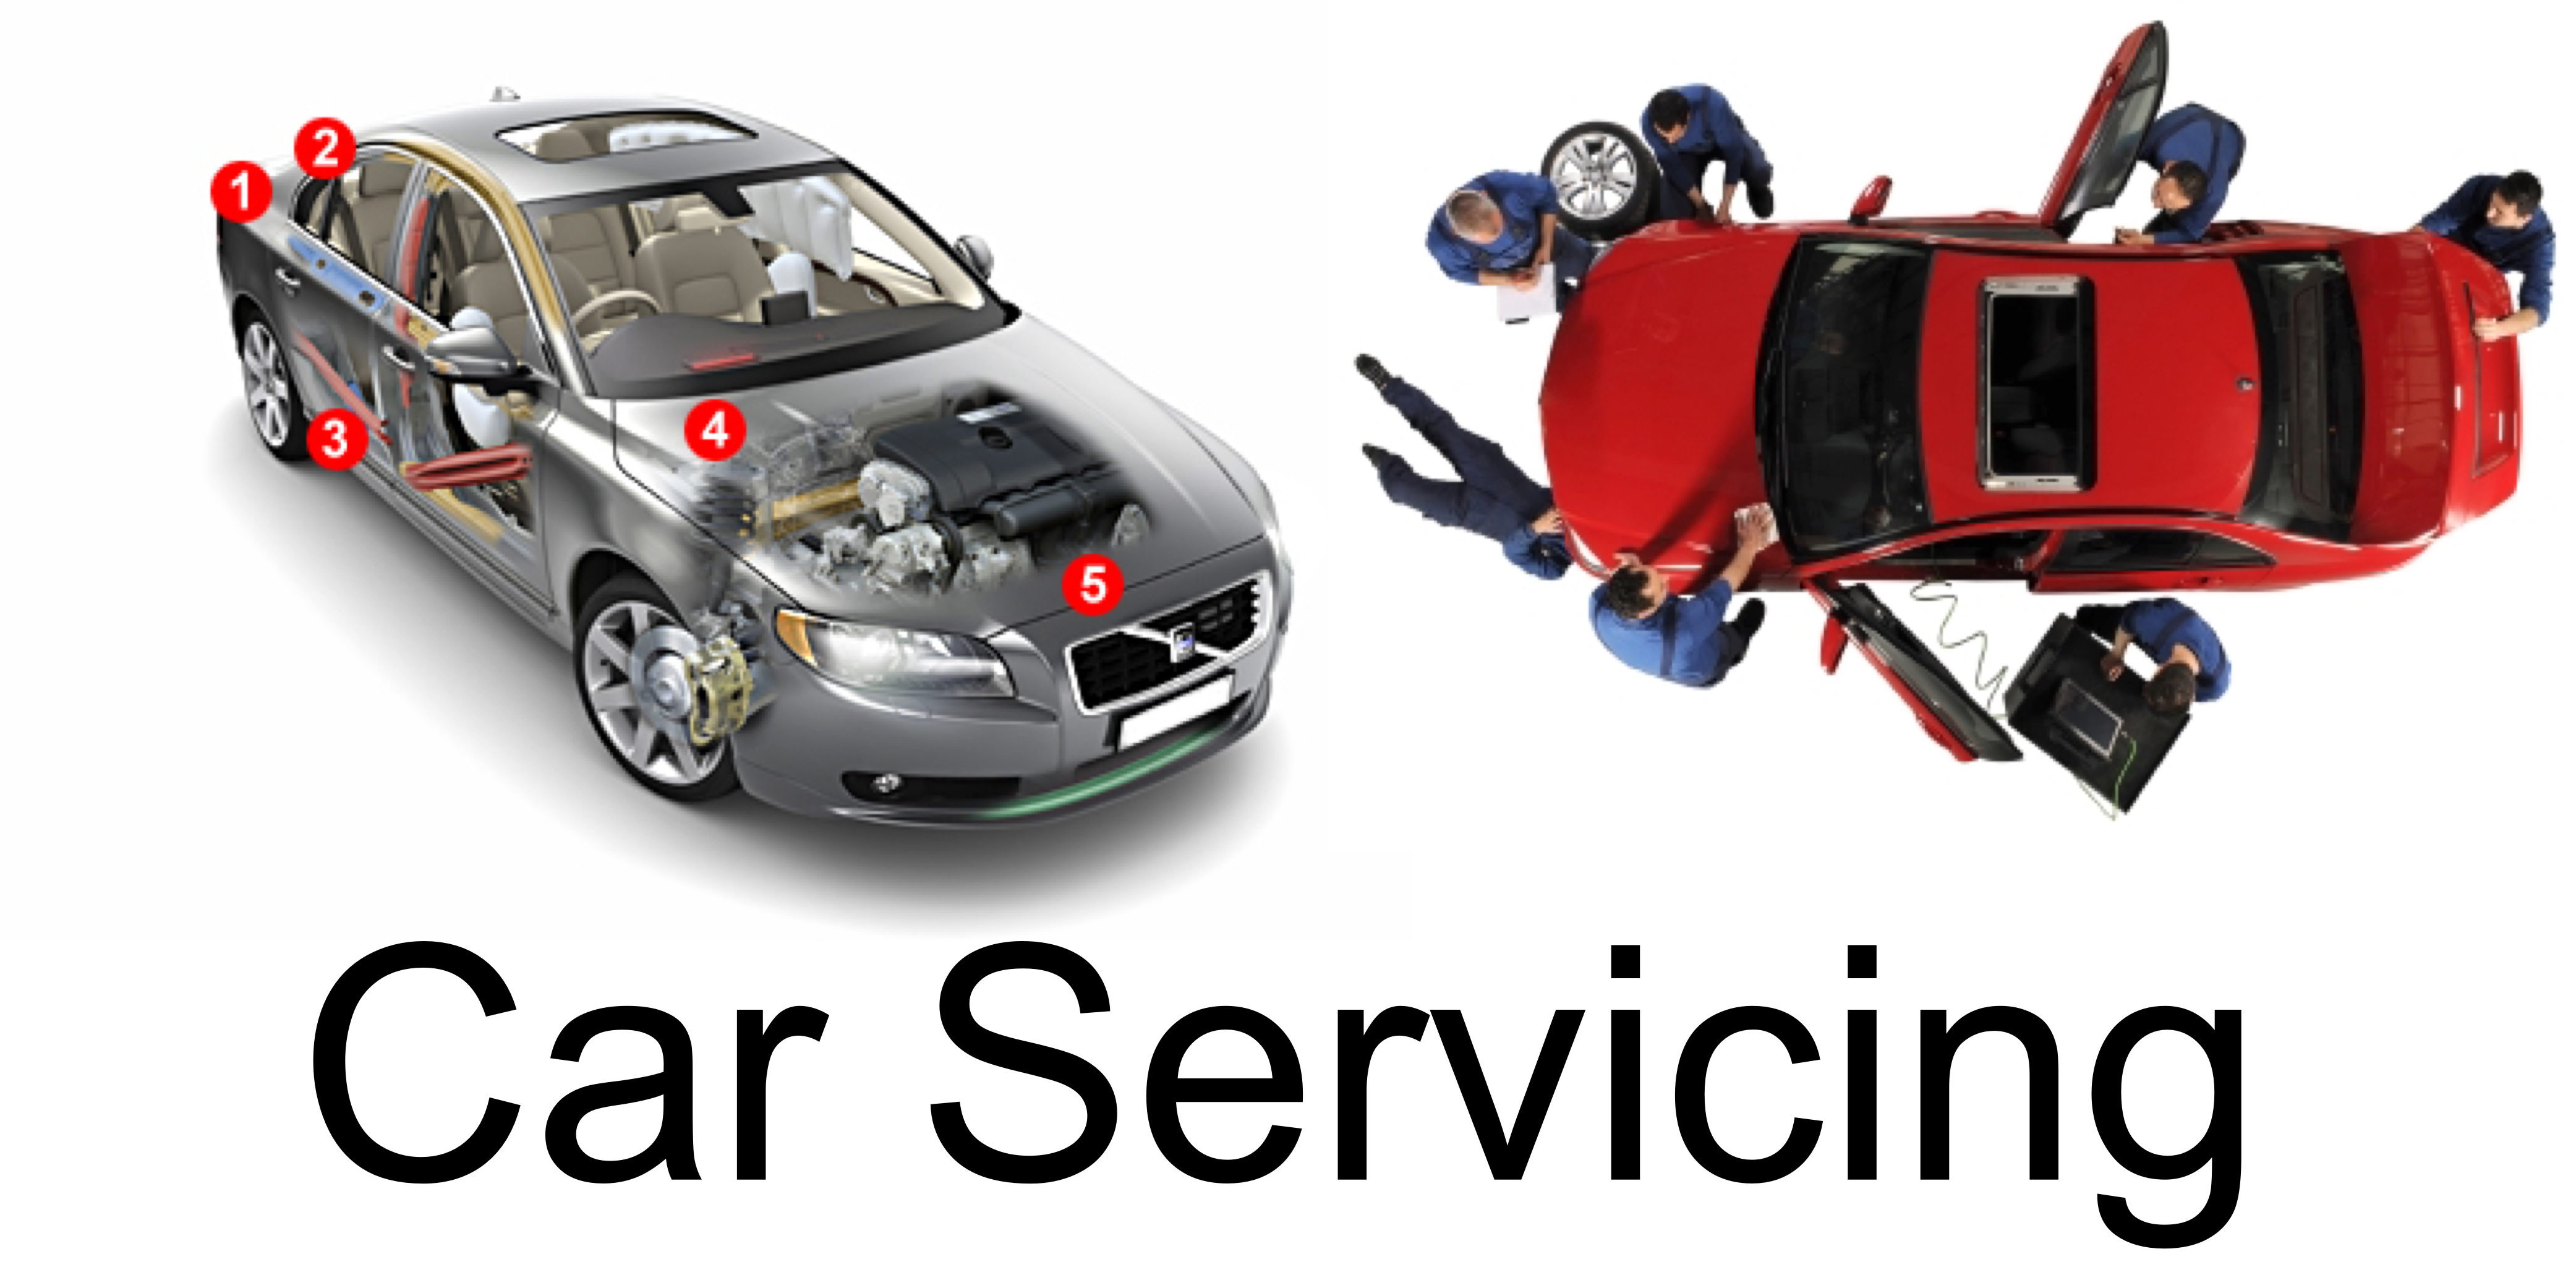 ANGUS TYRES OFFER CAR SERVICING